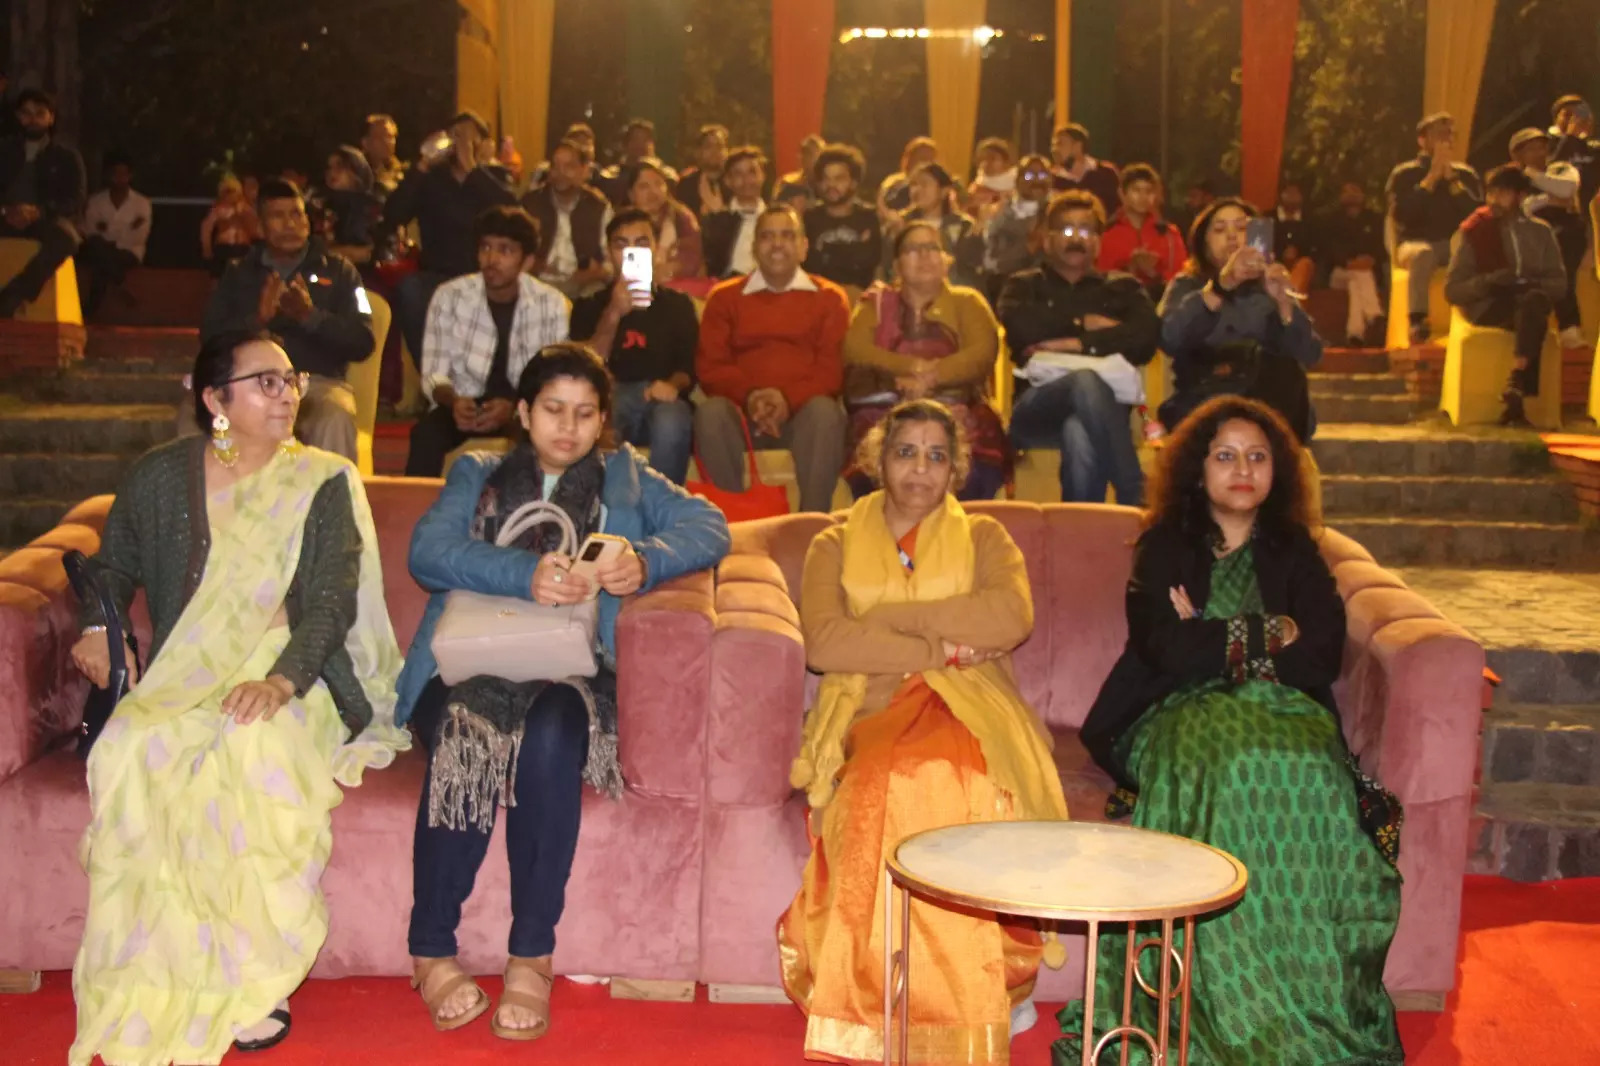 On the opening day, visitors witnessed a Kathak recital by Devika Devendra and attended the presentation of Bollywood songs by Jolly Mukherjee, Archana Singh and Pushkar Kandpal.